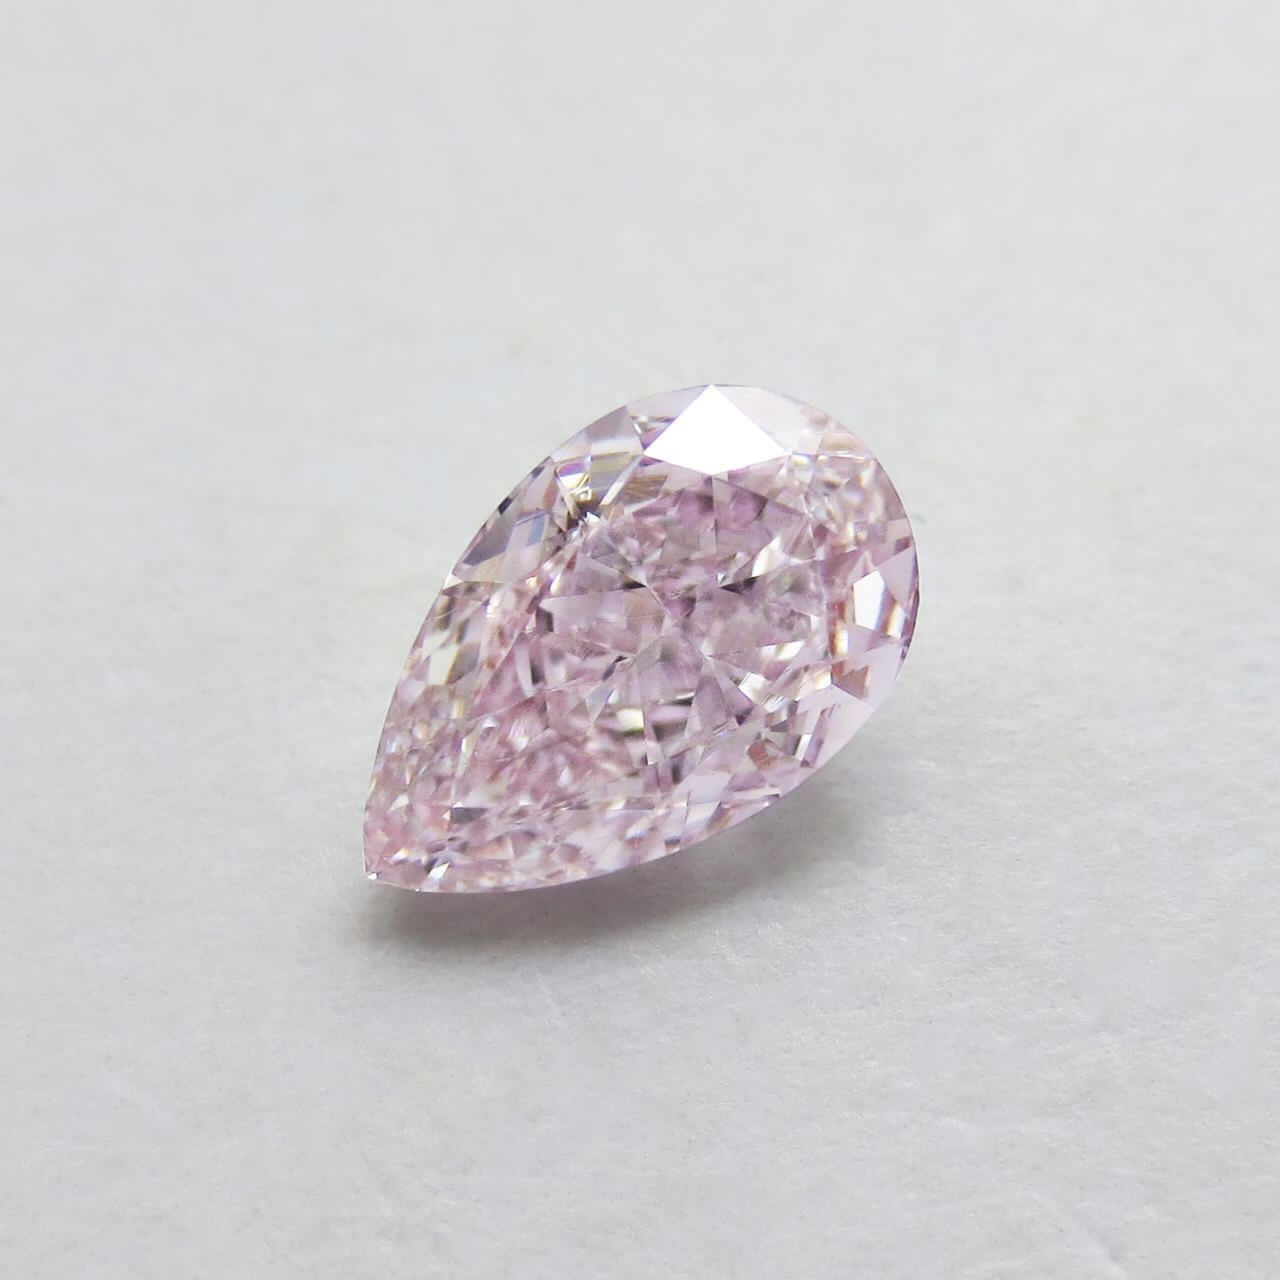 From the Emilio Jewelry Museum Vault, Showcasing a magnificent investment grade 1.25 carat Gia certified natural fancy light purplish  pink diamond. With Emilio's expertise after setting the center will face up with a visual of fancy intense pink!